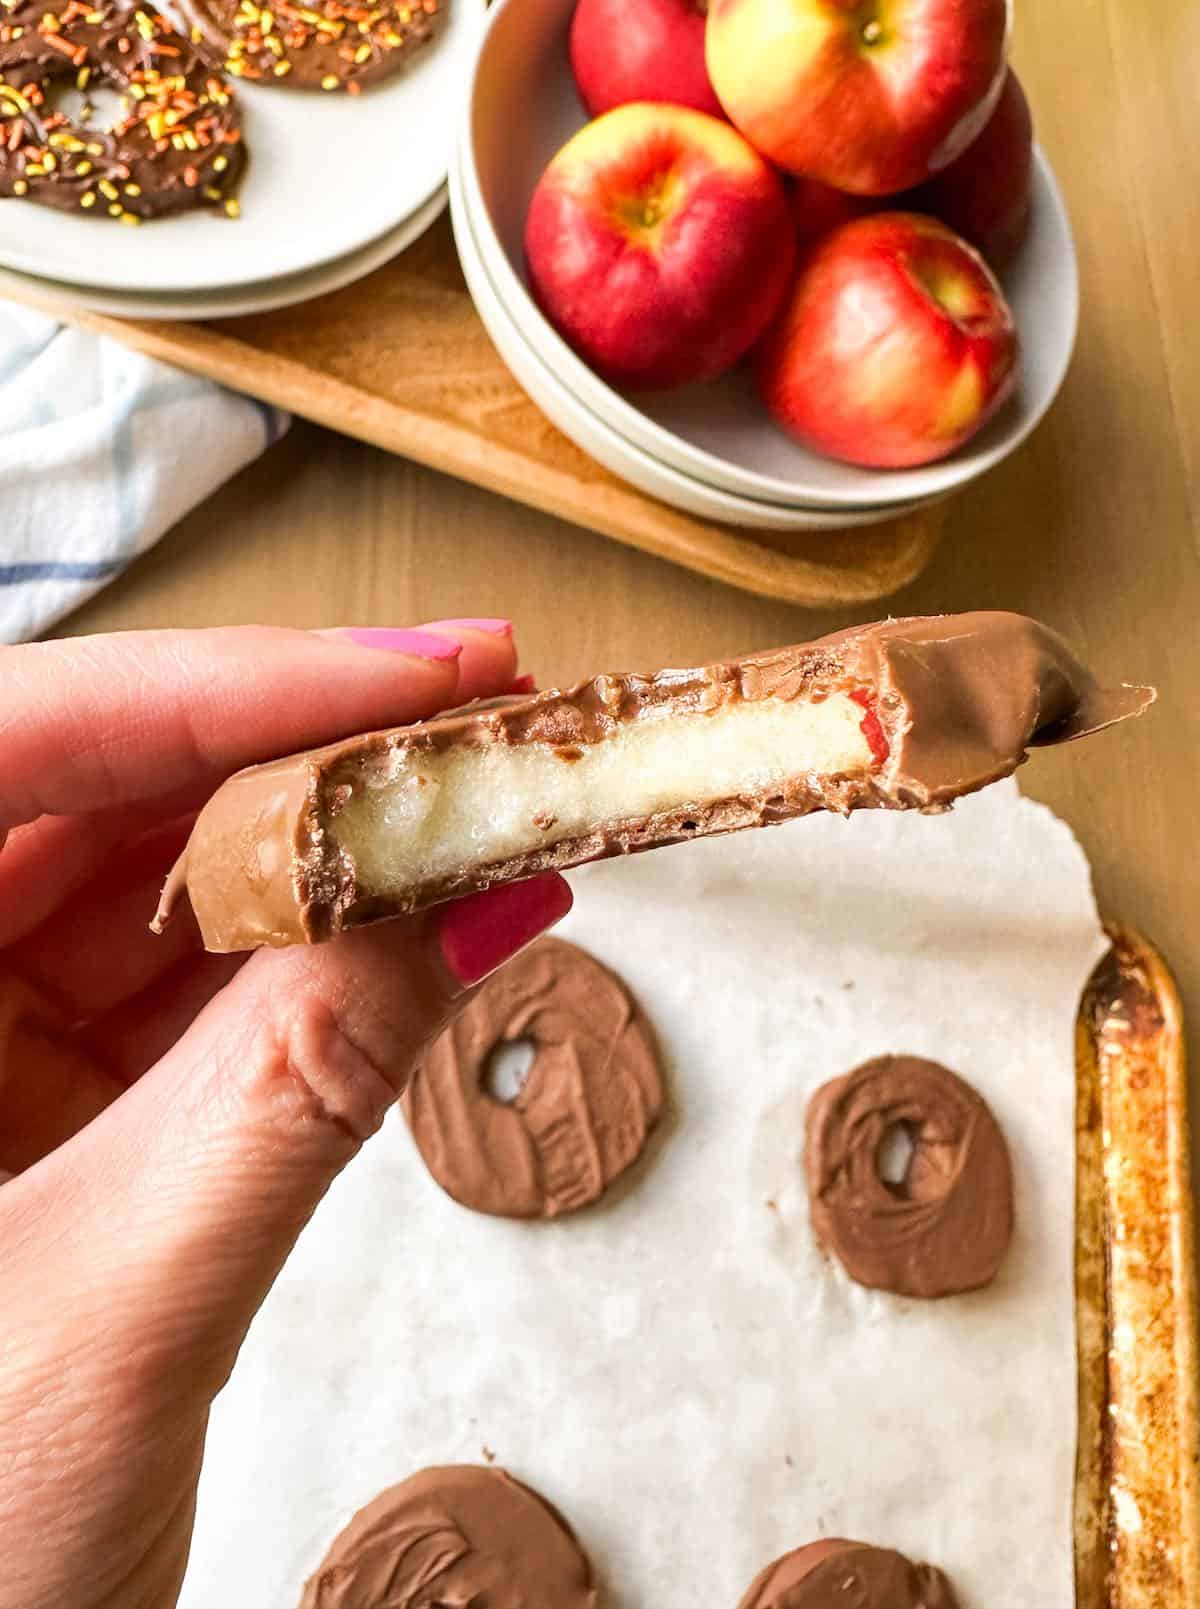 An apple slice coated in chocolate with a bite taken out of it.